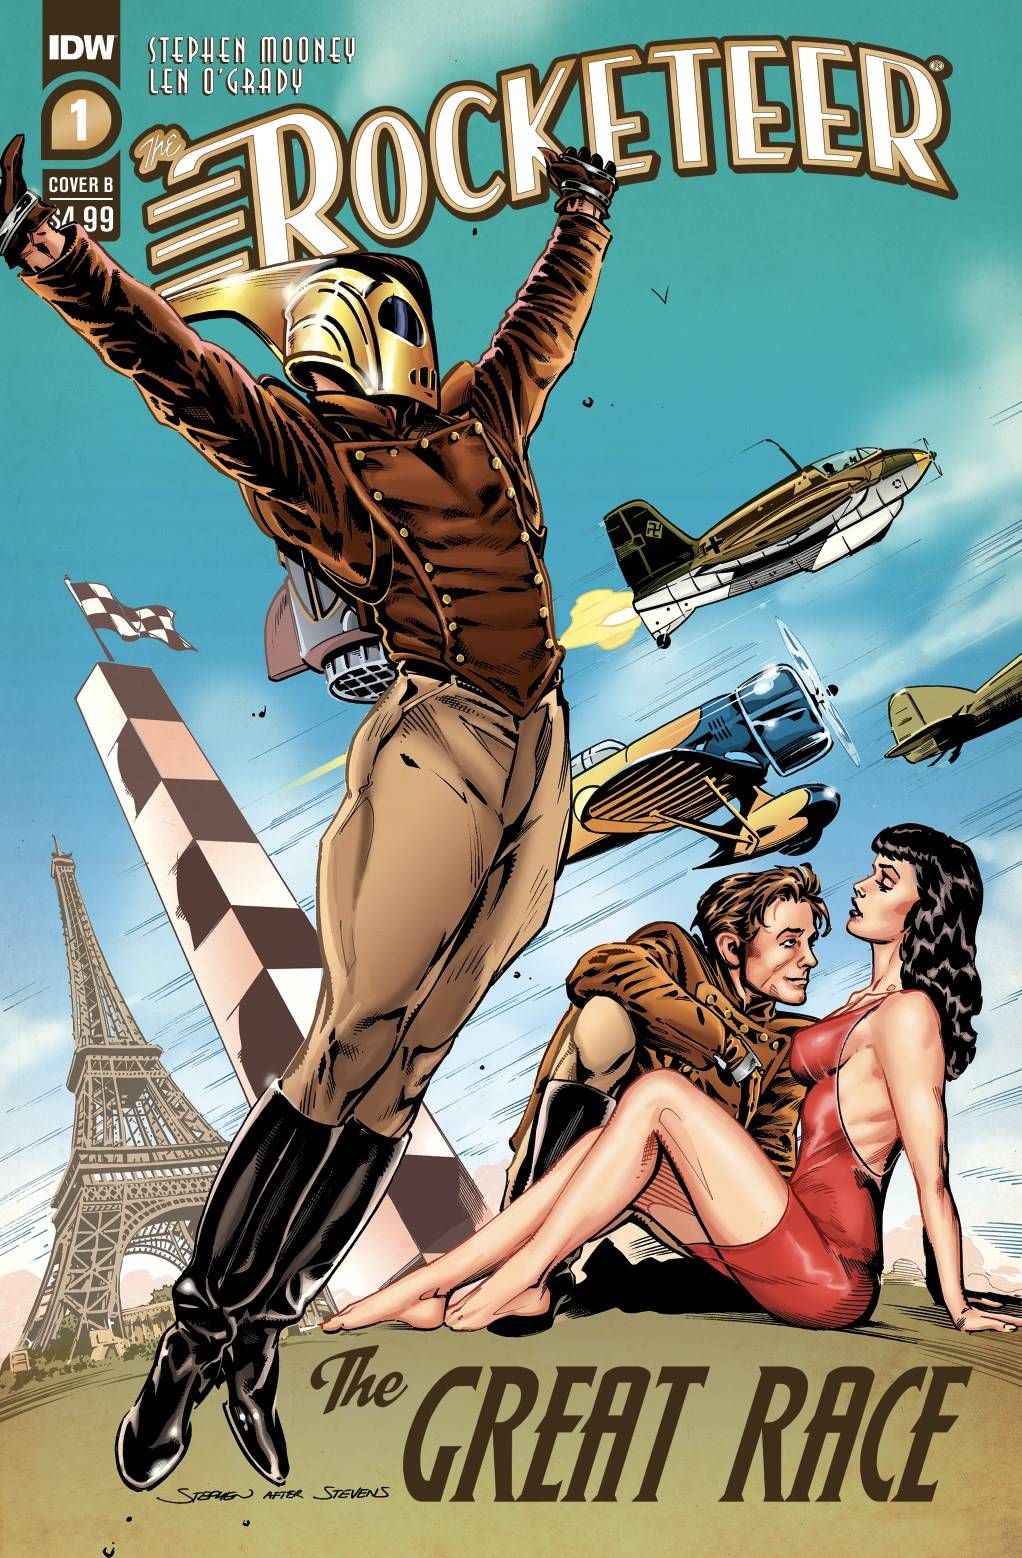 Rocketeer The Great Race #1 Cover B Stephen Mooney (Of 4)